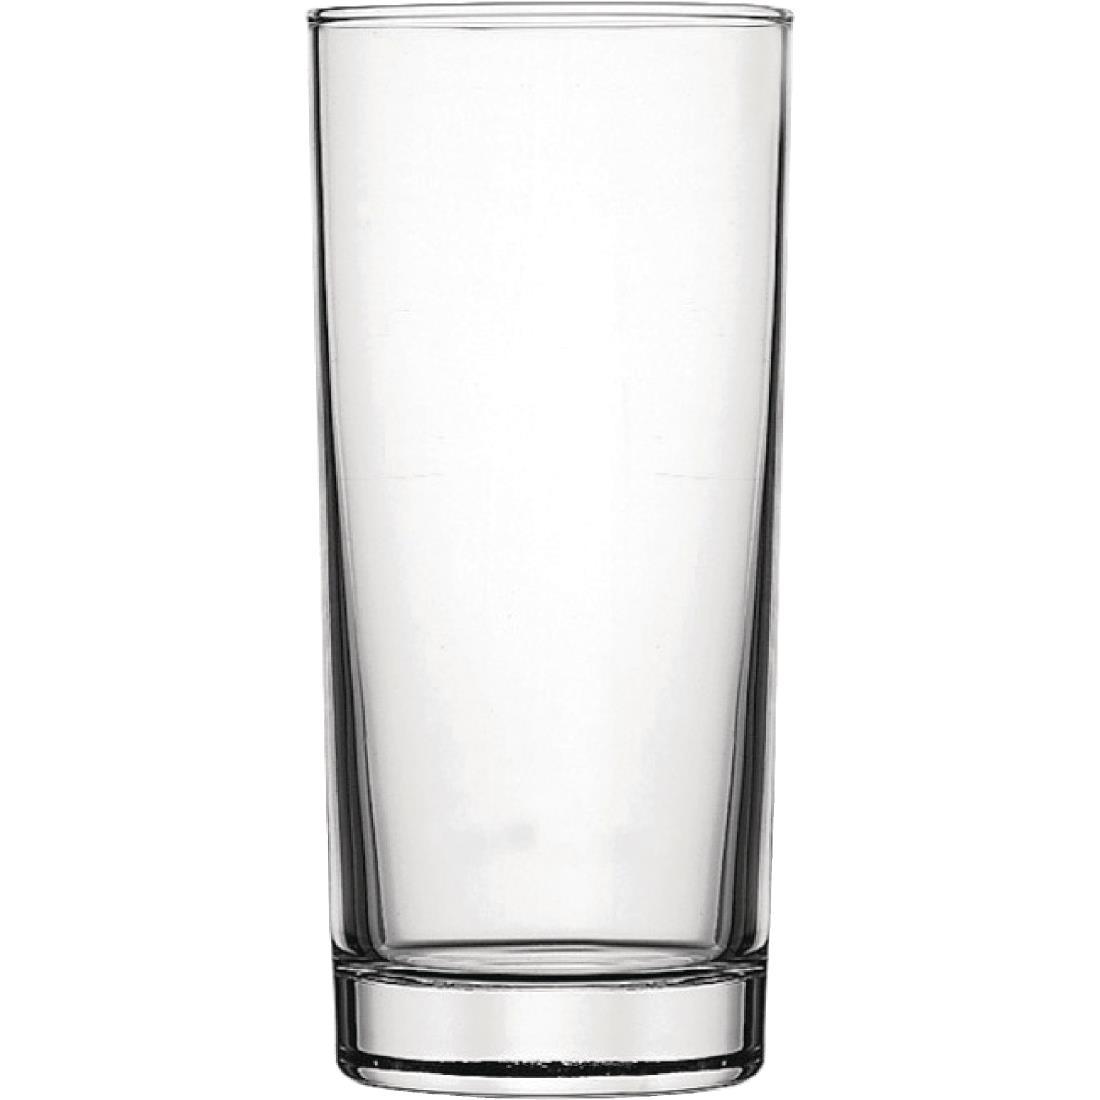 Arcoroc Hi Ball Glasses 560ml CE Marked (Pack of 24) - DL216  - 1